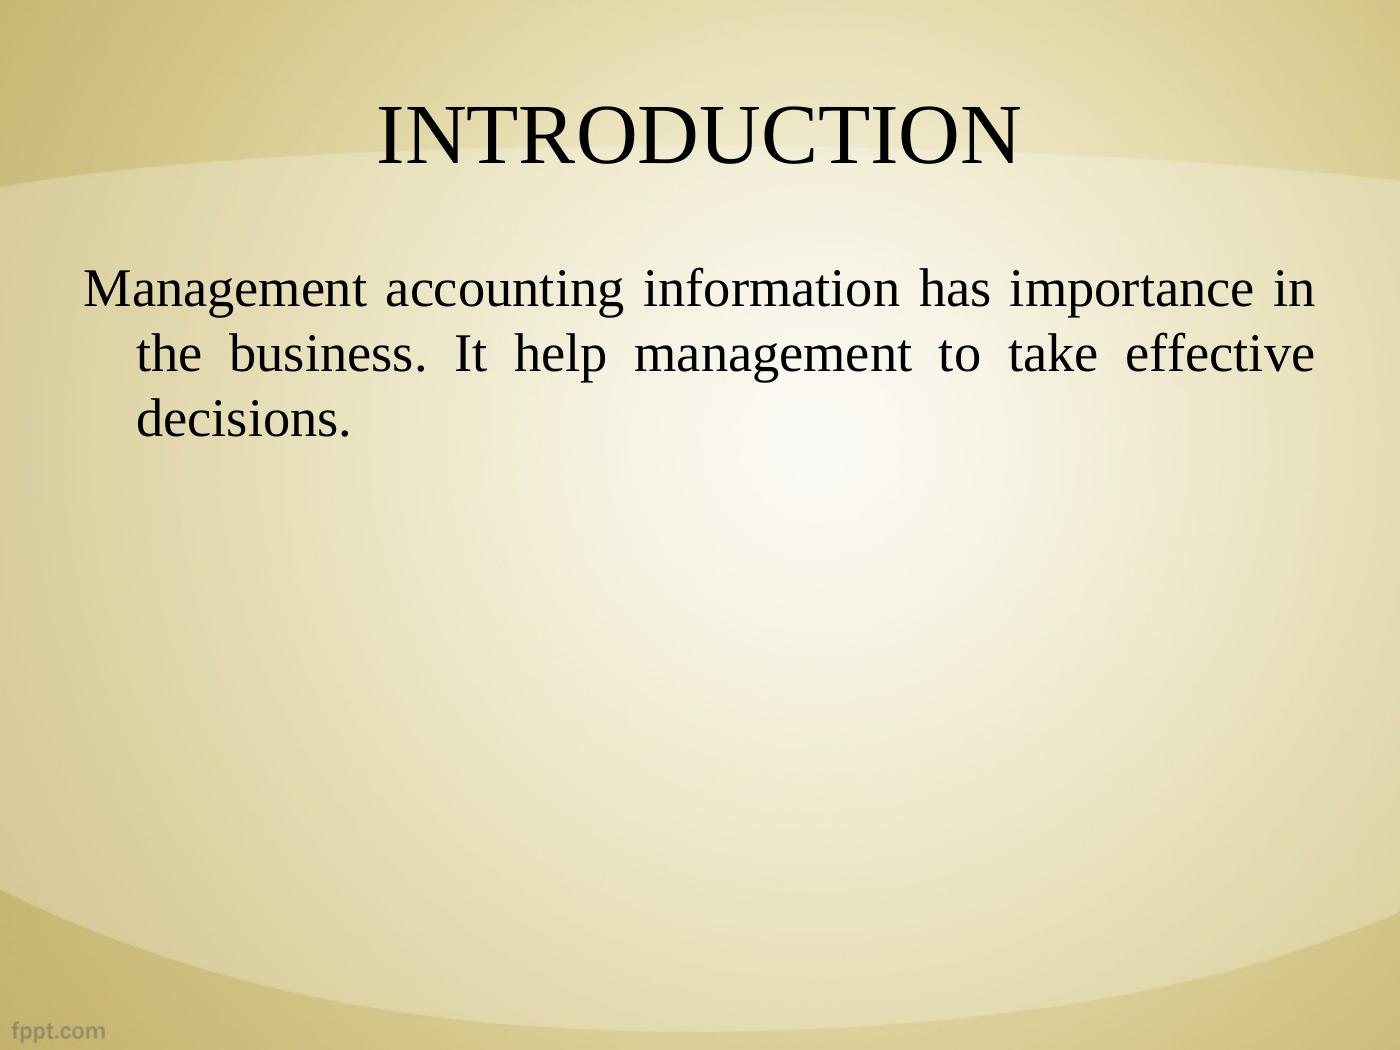 Importance of Management Accounting Information in the Travel Business_4